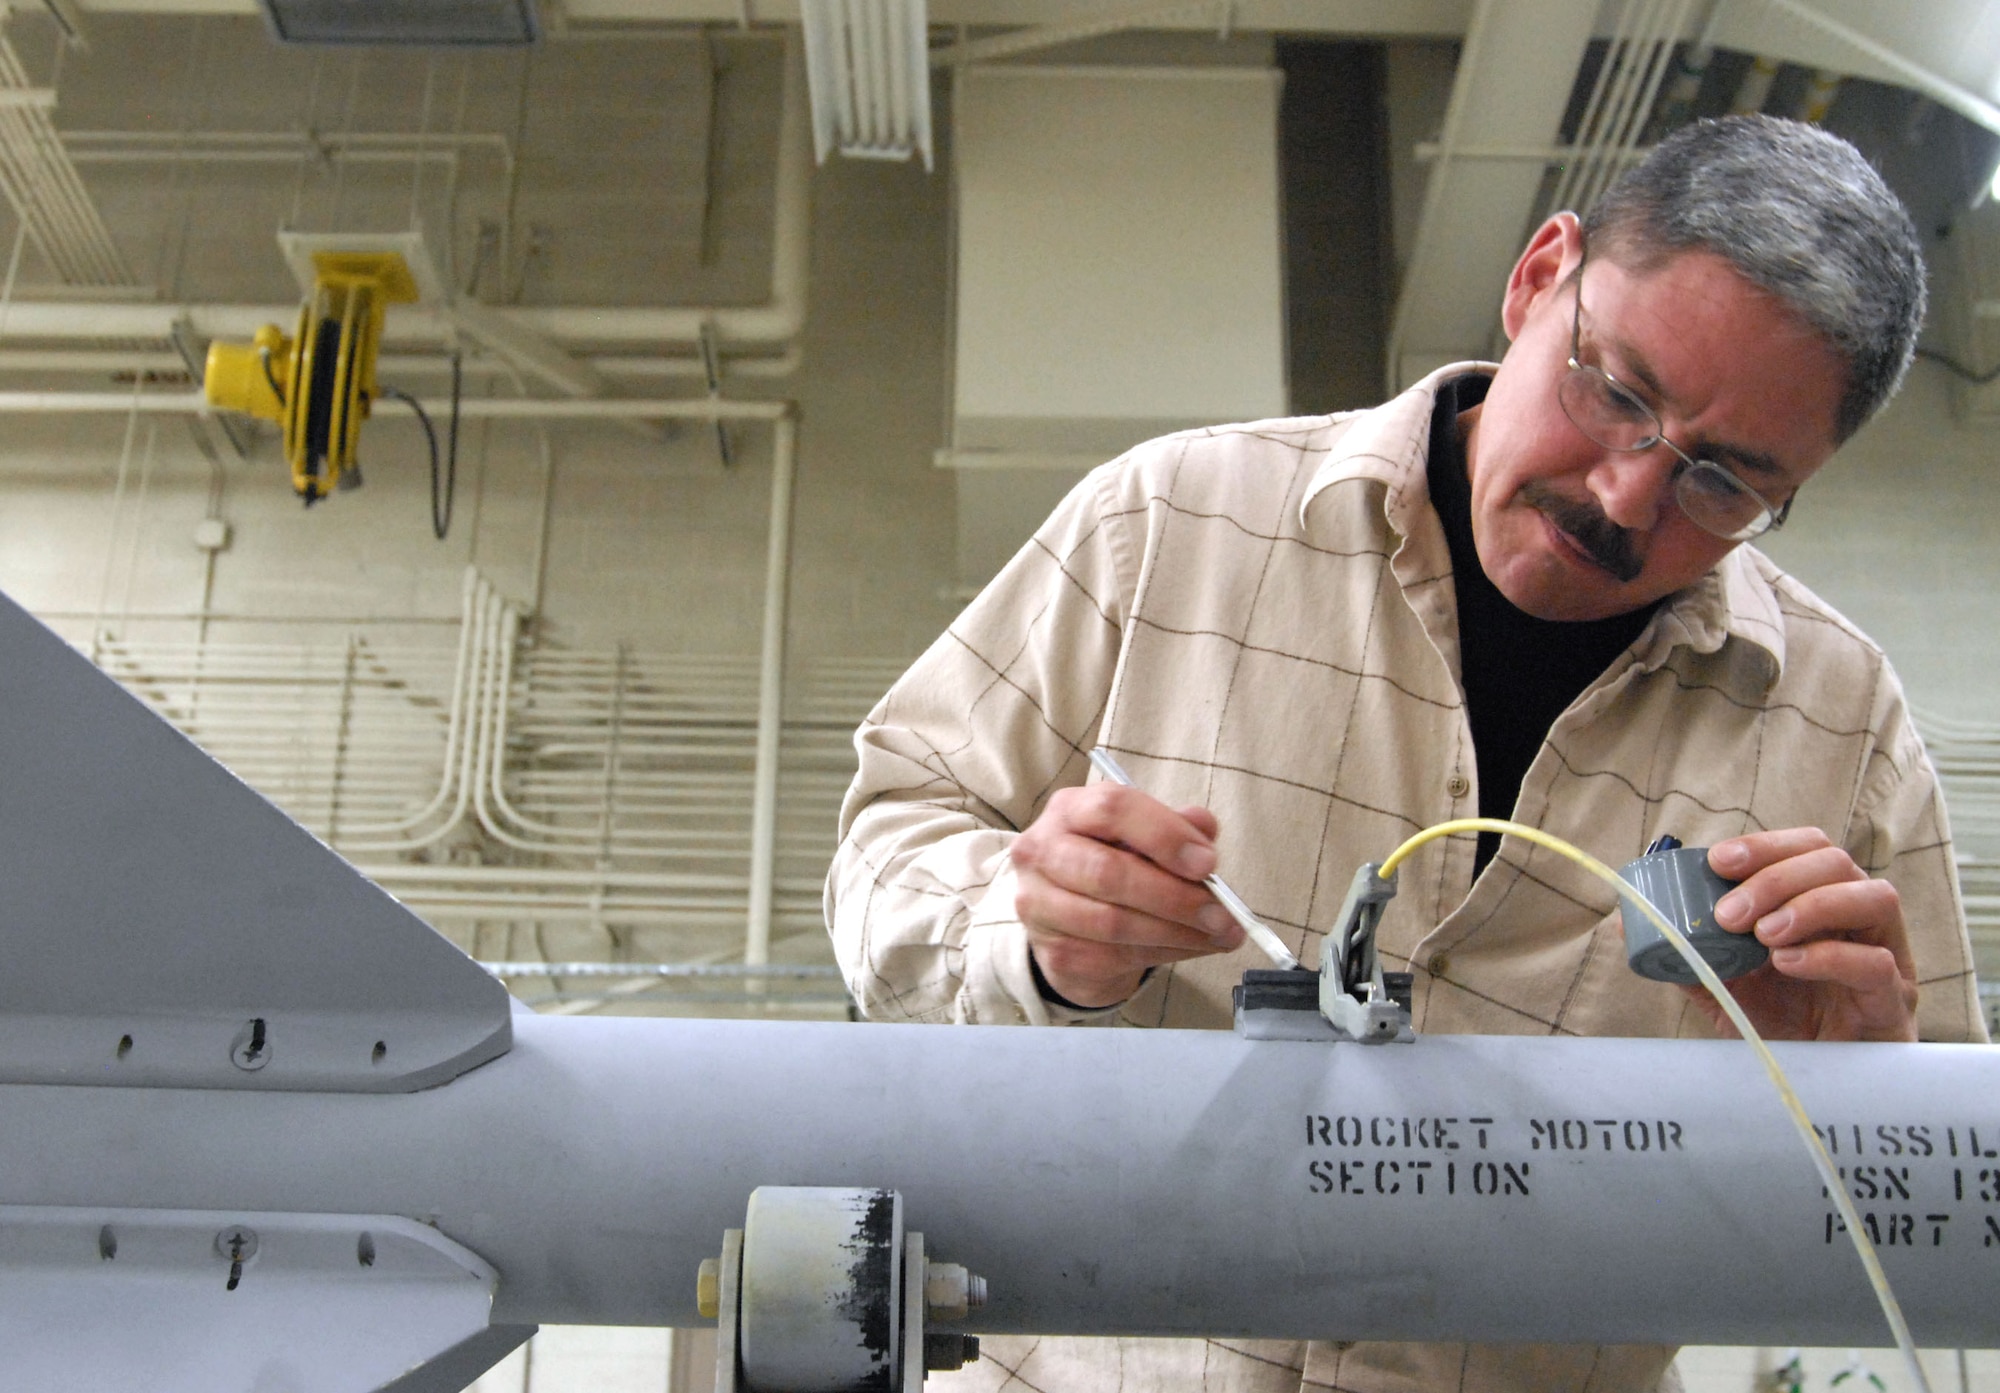 Shawn Cotey, 412th Maintenance Squadron munitions maintenance mechanic, is the Air Force Flight Test Center Trades and Labor Civilian of the Year. Among his accomplishments during the year, Mr. Cotey tackled the building of 27 BDU-50s, four GBU-39s and four CBU-105s for the B-1B Lancer. He also built and processed approximately 2,100 chaff and flare countermeasure munitions for the F-22 Raptor. (Air Force photo by Senior Airman Stacy Sanchez)